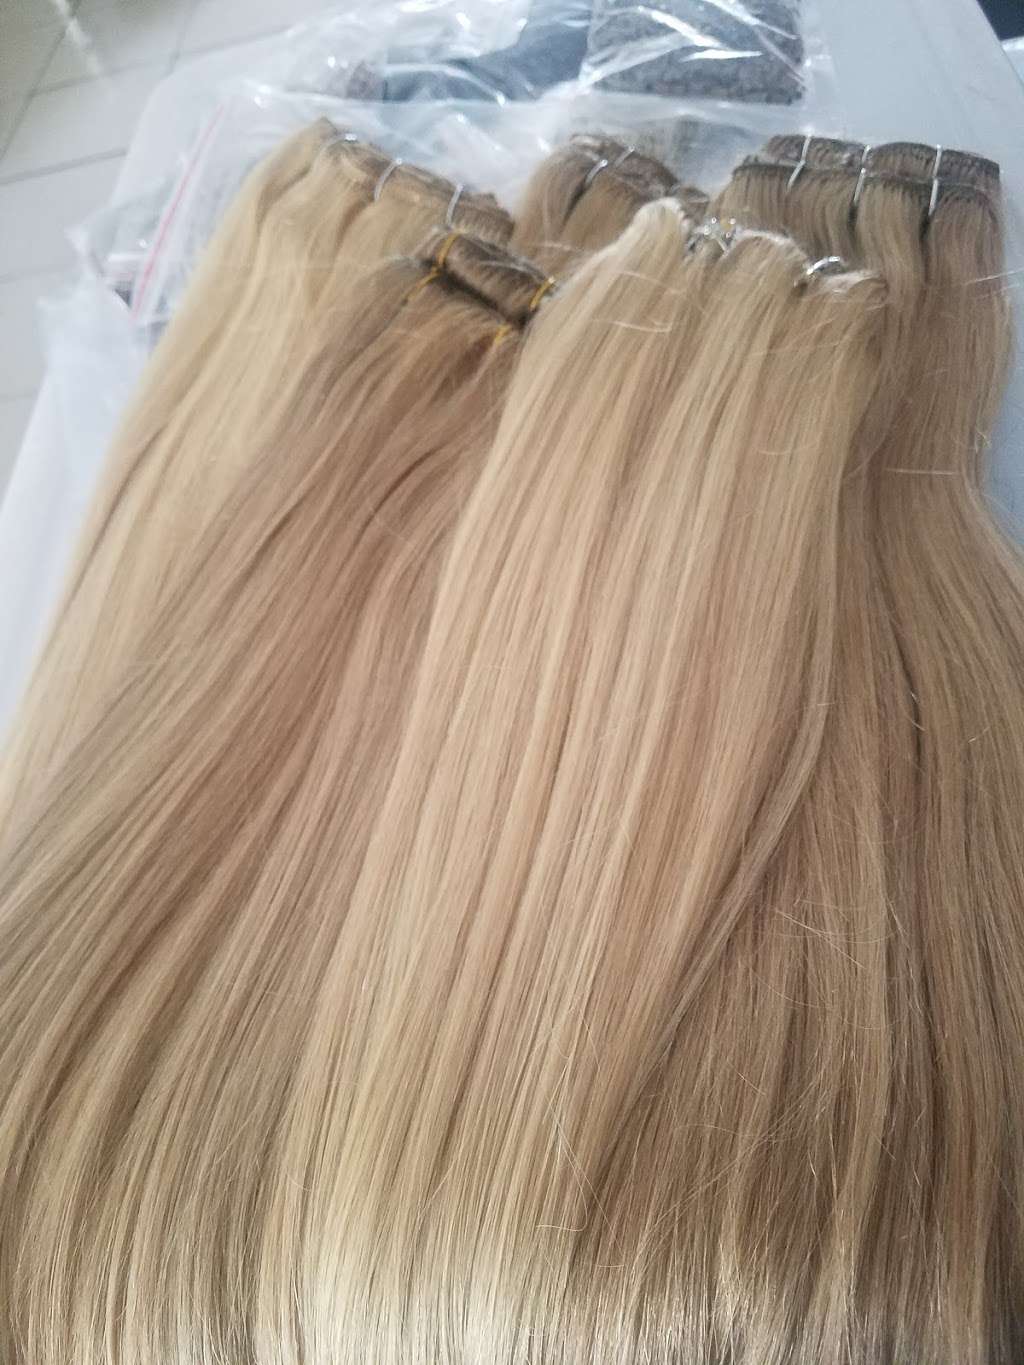 Higher-QualityHairExtensions | 6042, 10132 San Gabriel Ave, South Gate, CA 90280, USA | Phone: (323) 439-4446